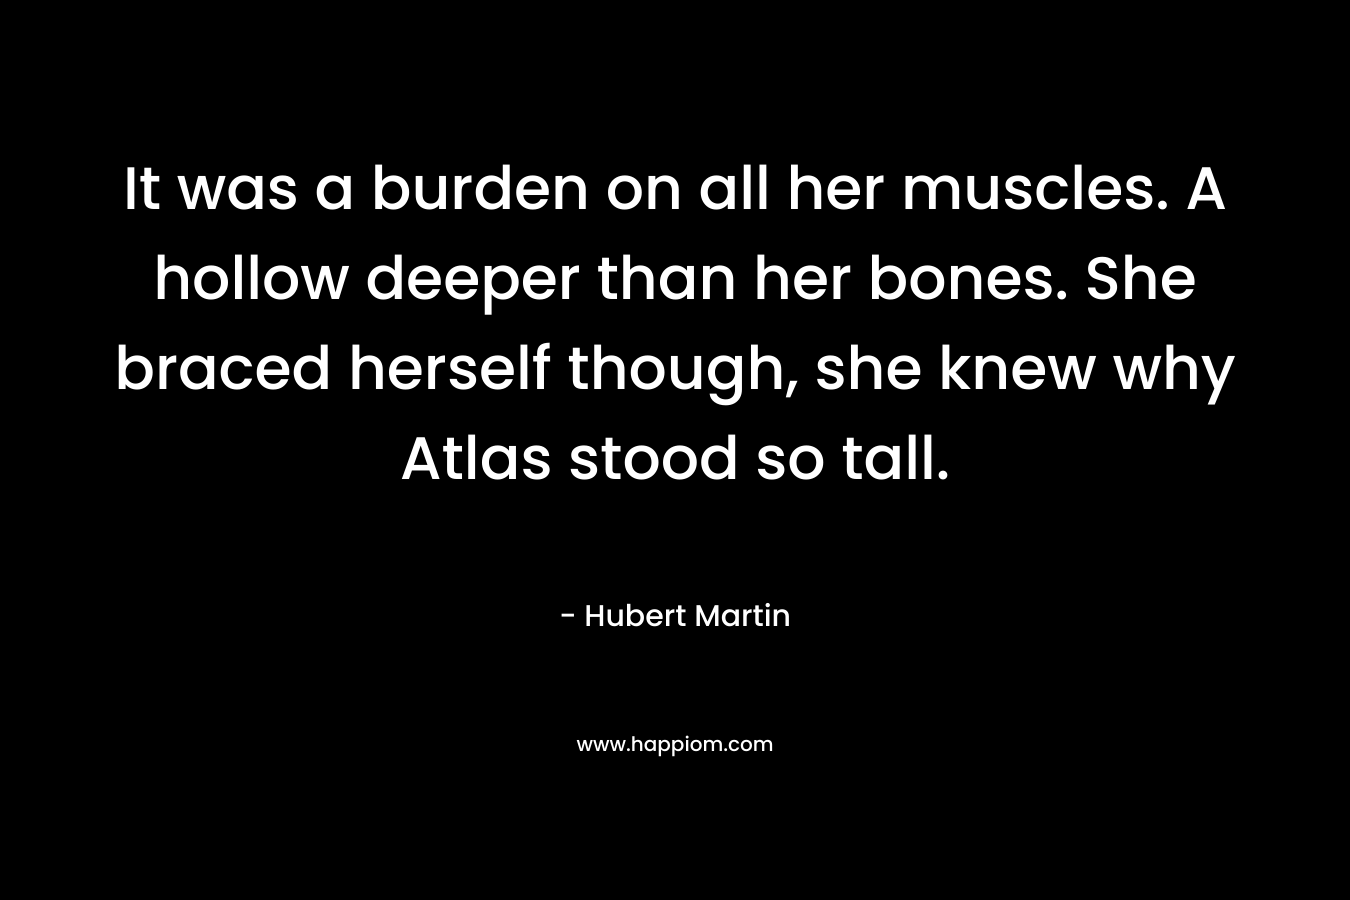 It was a burden on all her muscles. A hollow deeper than her bones. She braced herself though, she knew why Atlas stood so tall. – Hubert Martin